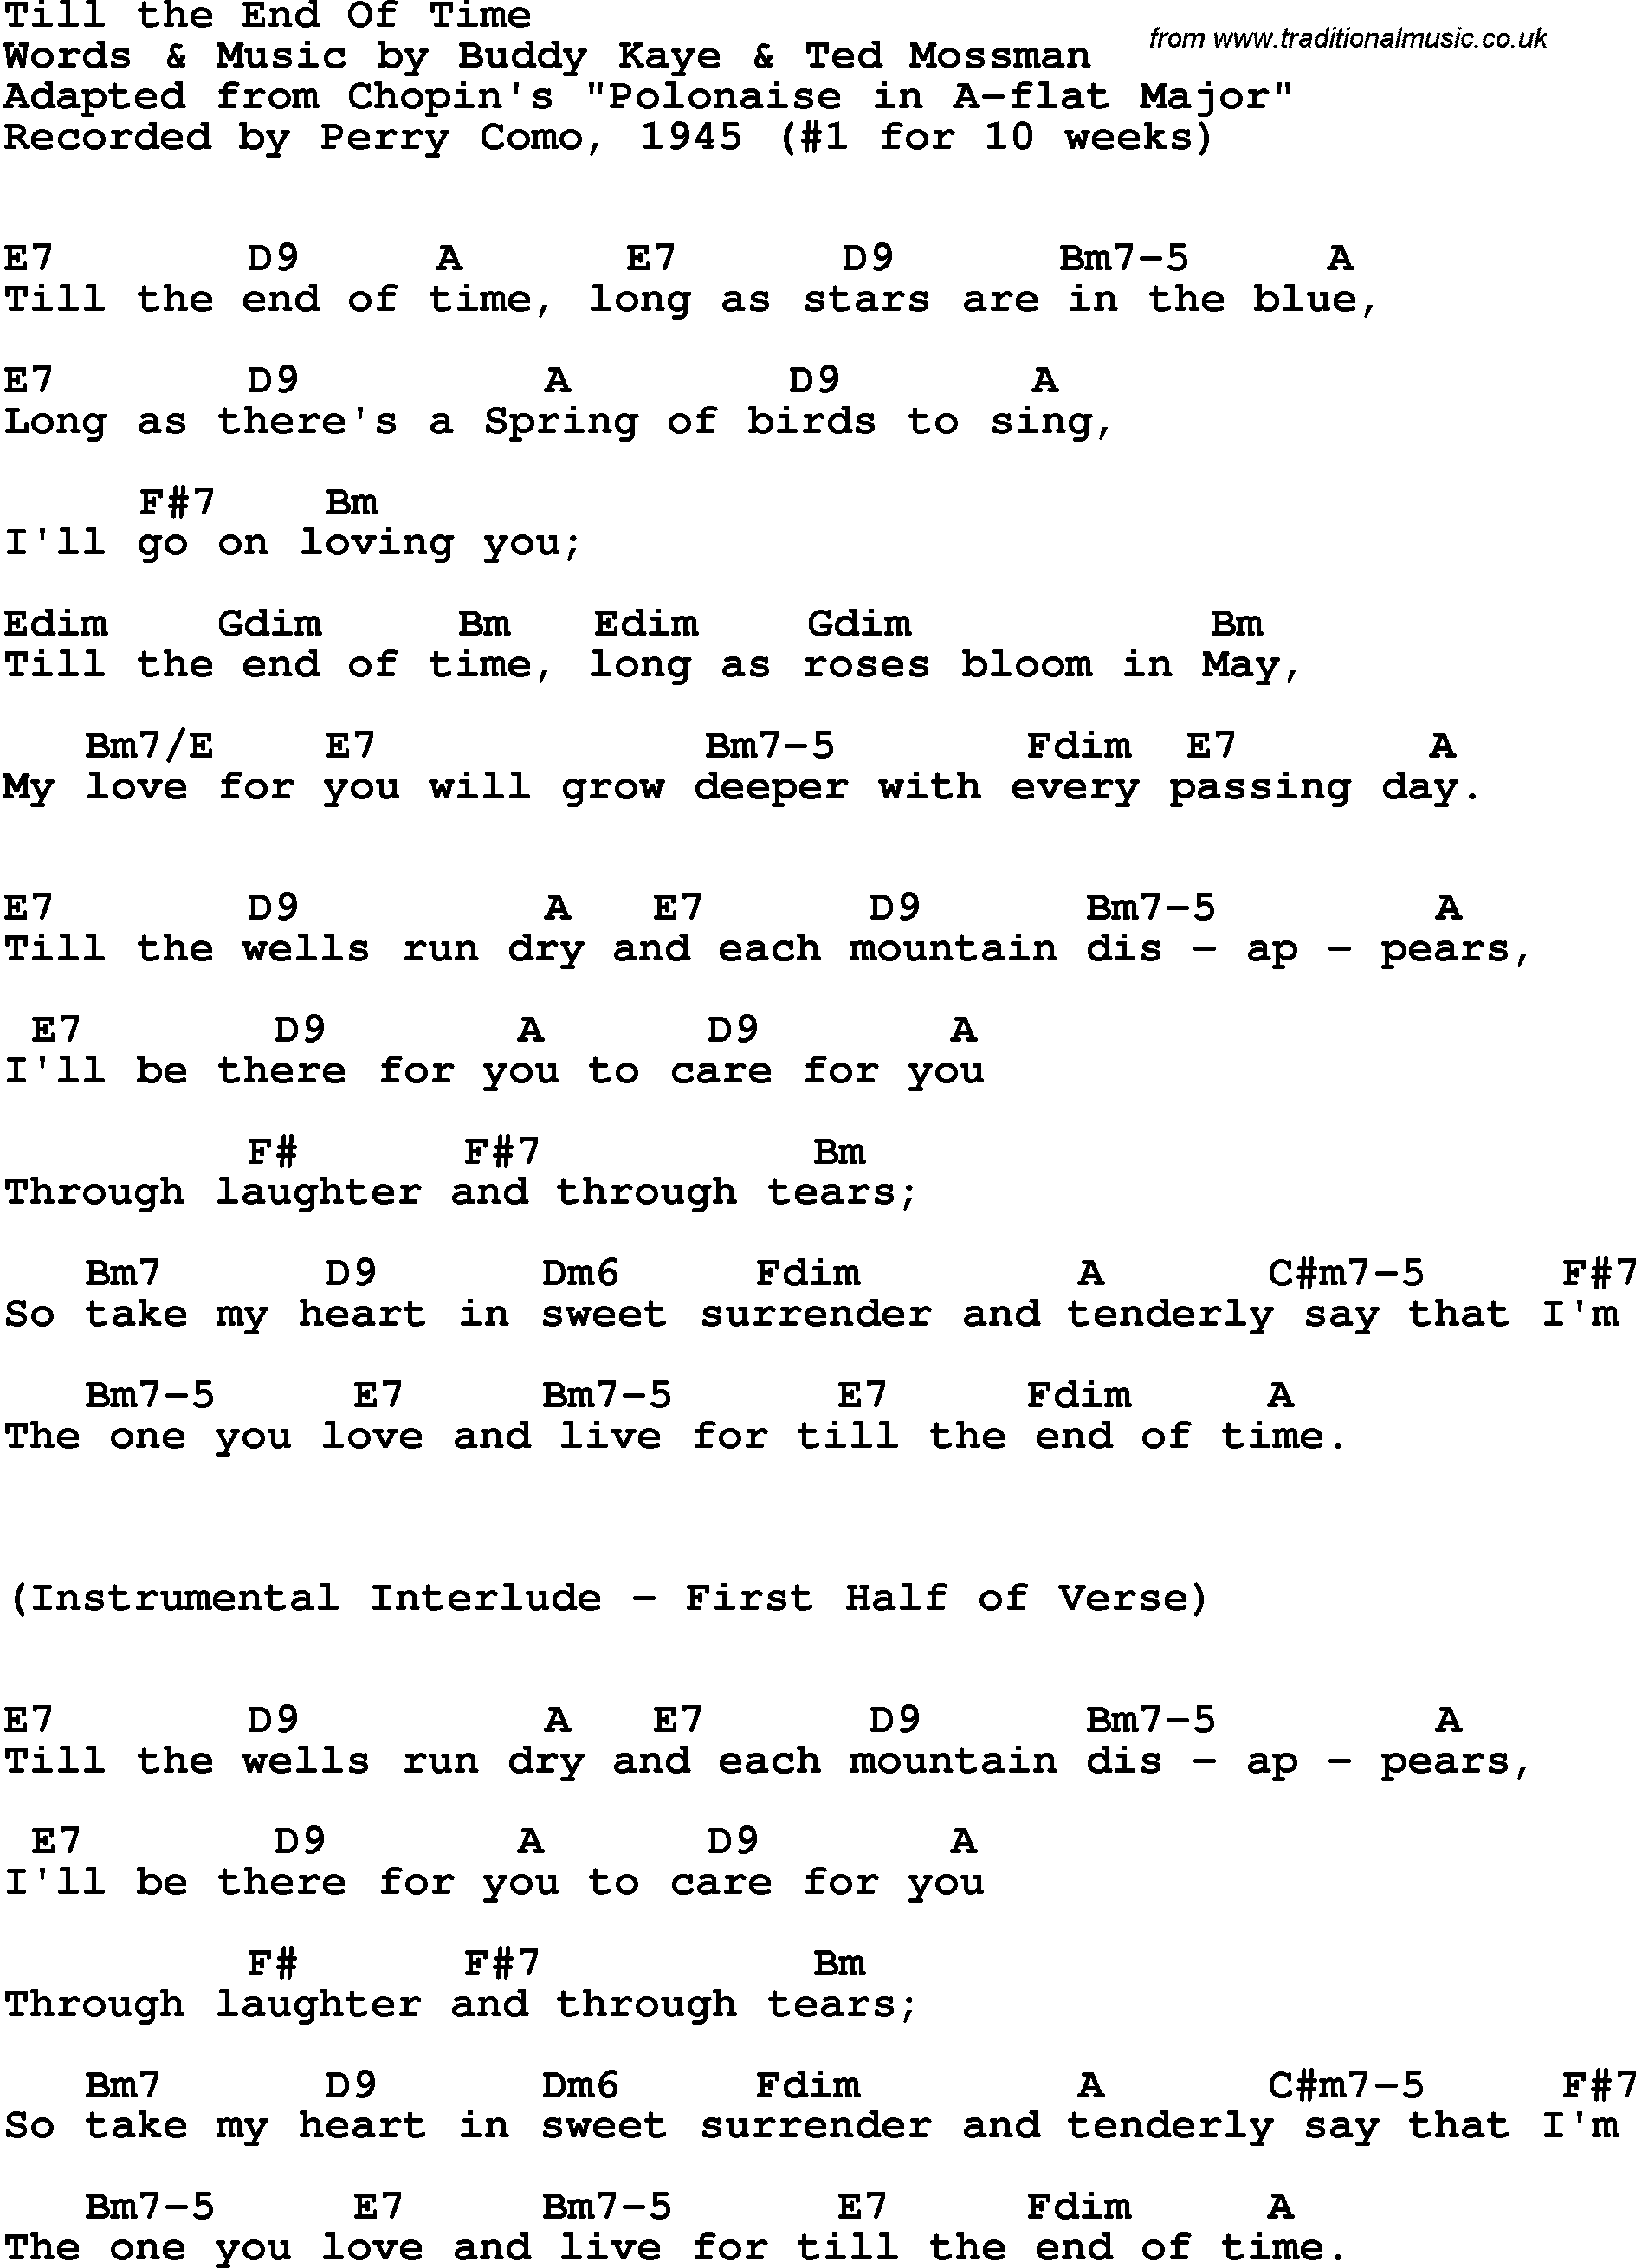 Song Lyrics with guitar chords for Till The End Of Time - Perry Como, 1945